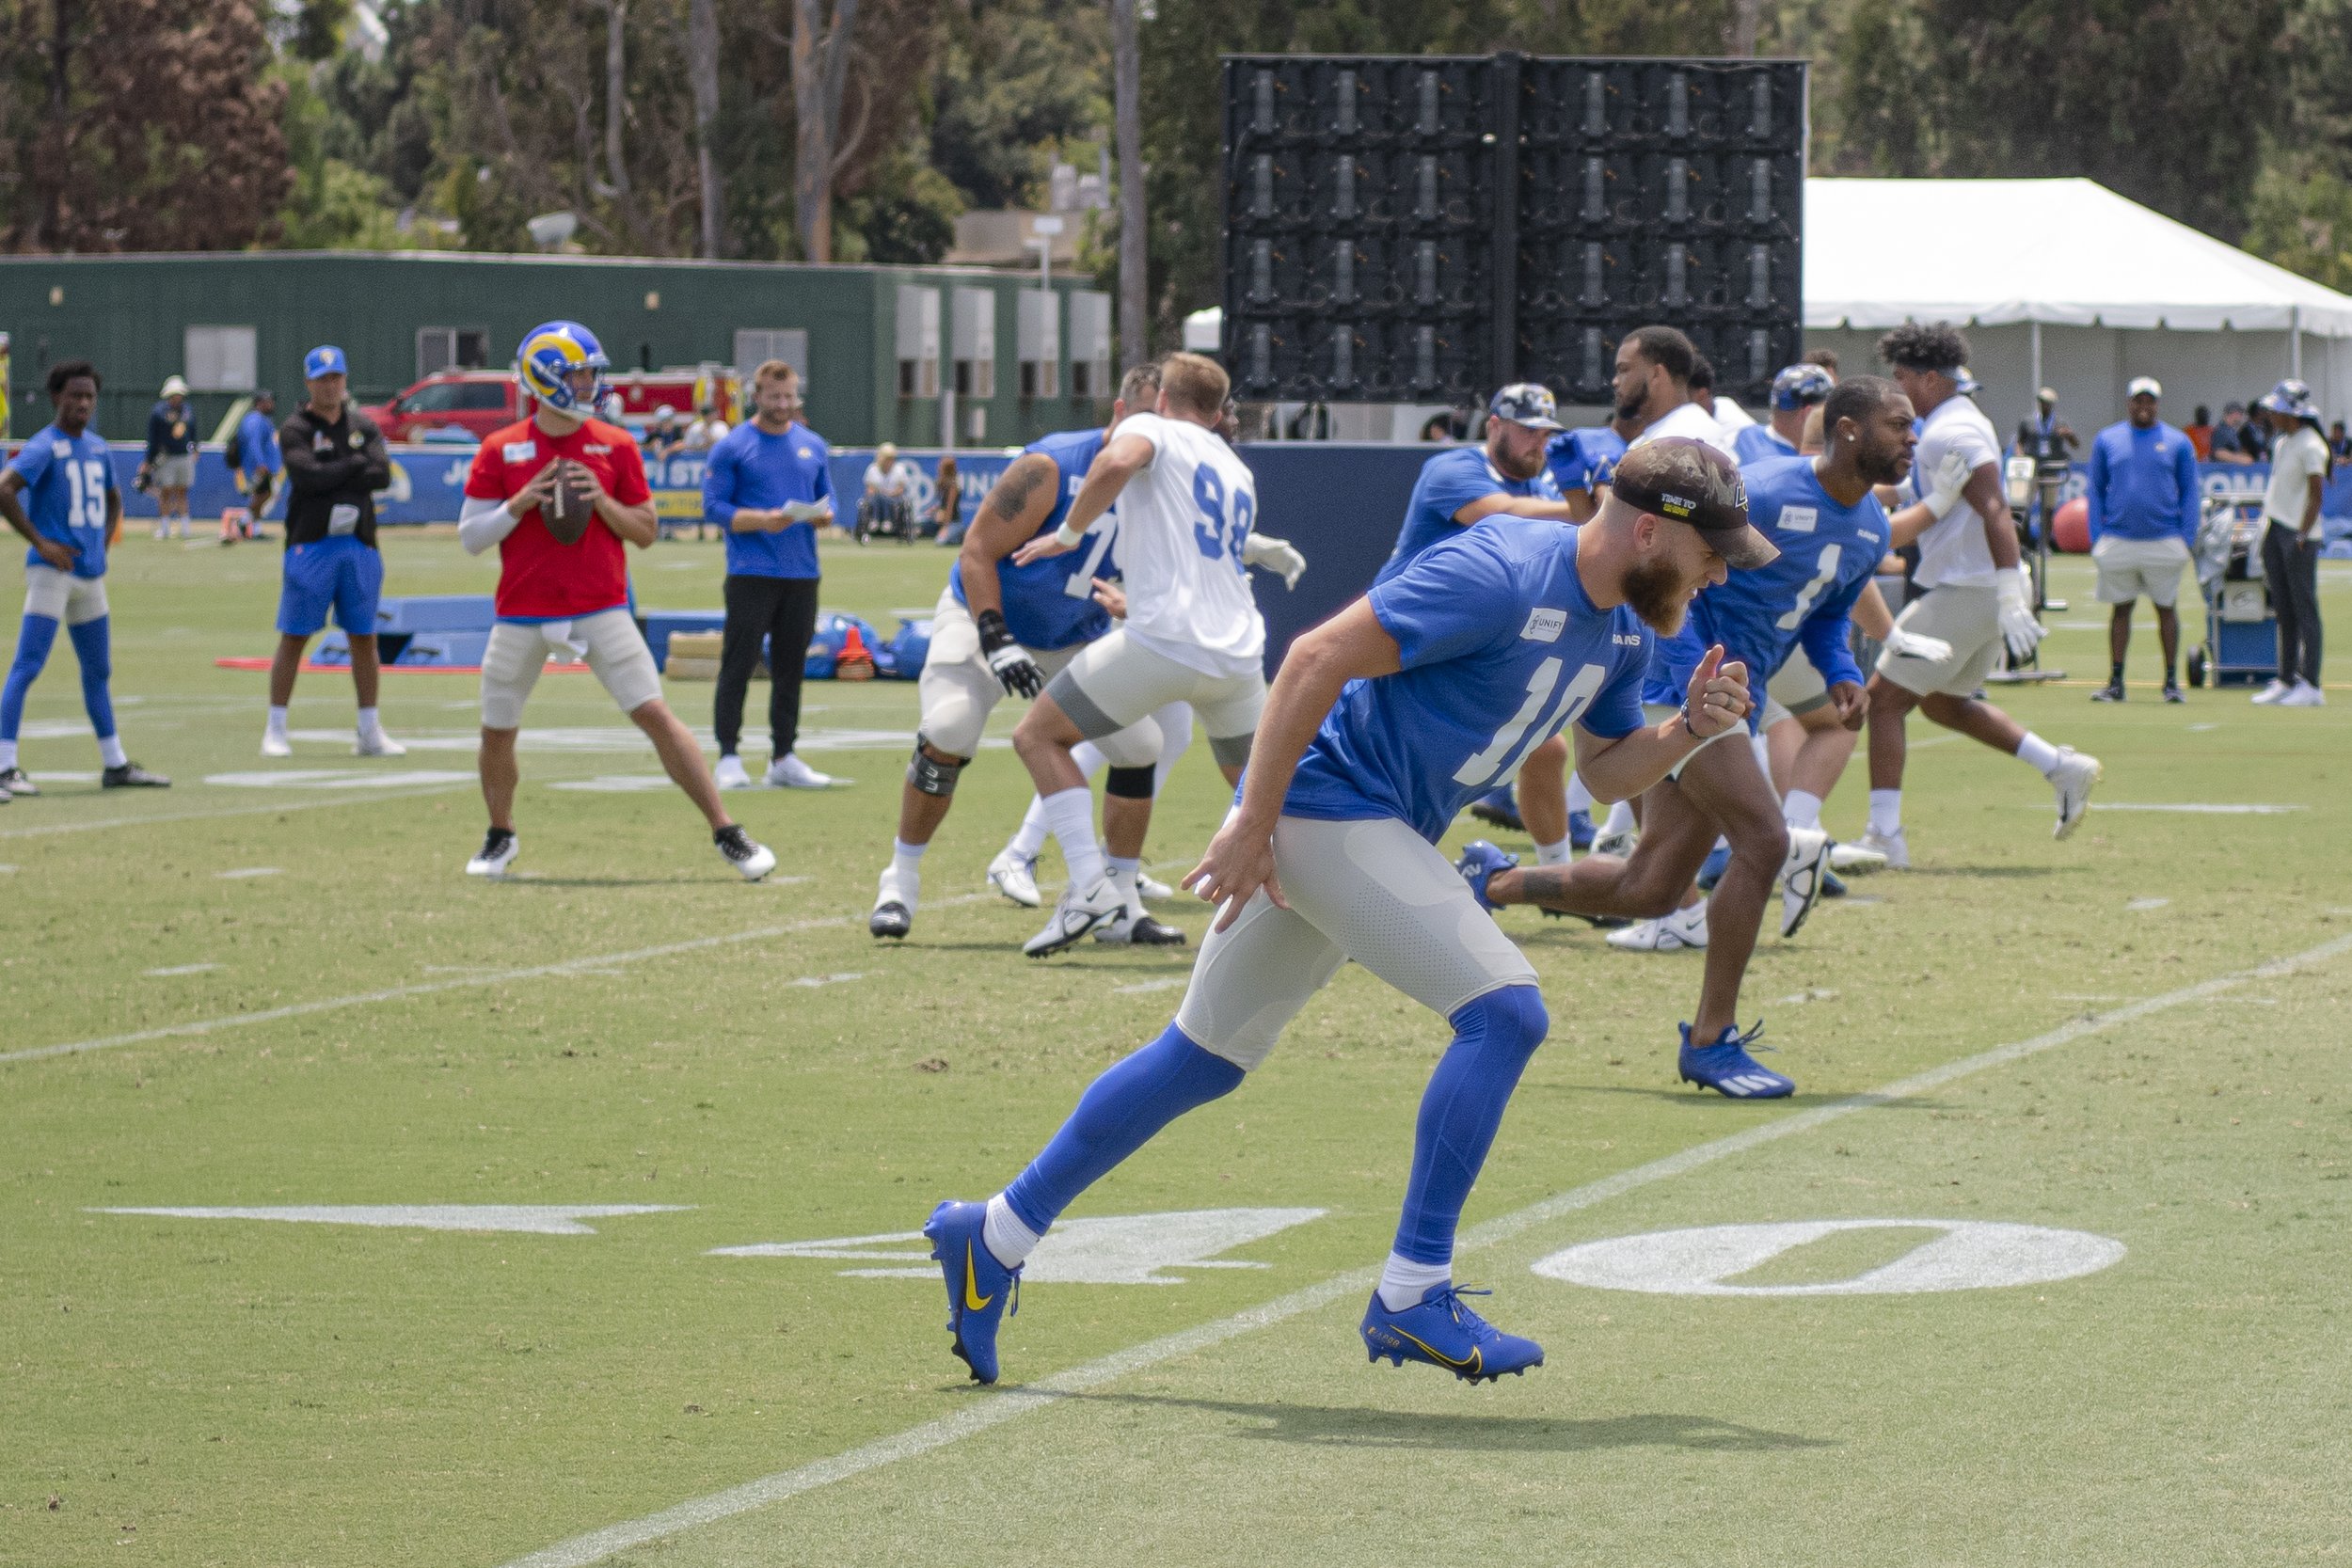  Matthew Stafford the Quarterback for the Los Angeles Rams drops back as he searches for open receivers before the team officially put pads on. (Jon Putman | The Corsair) 